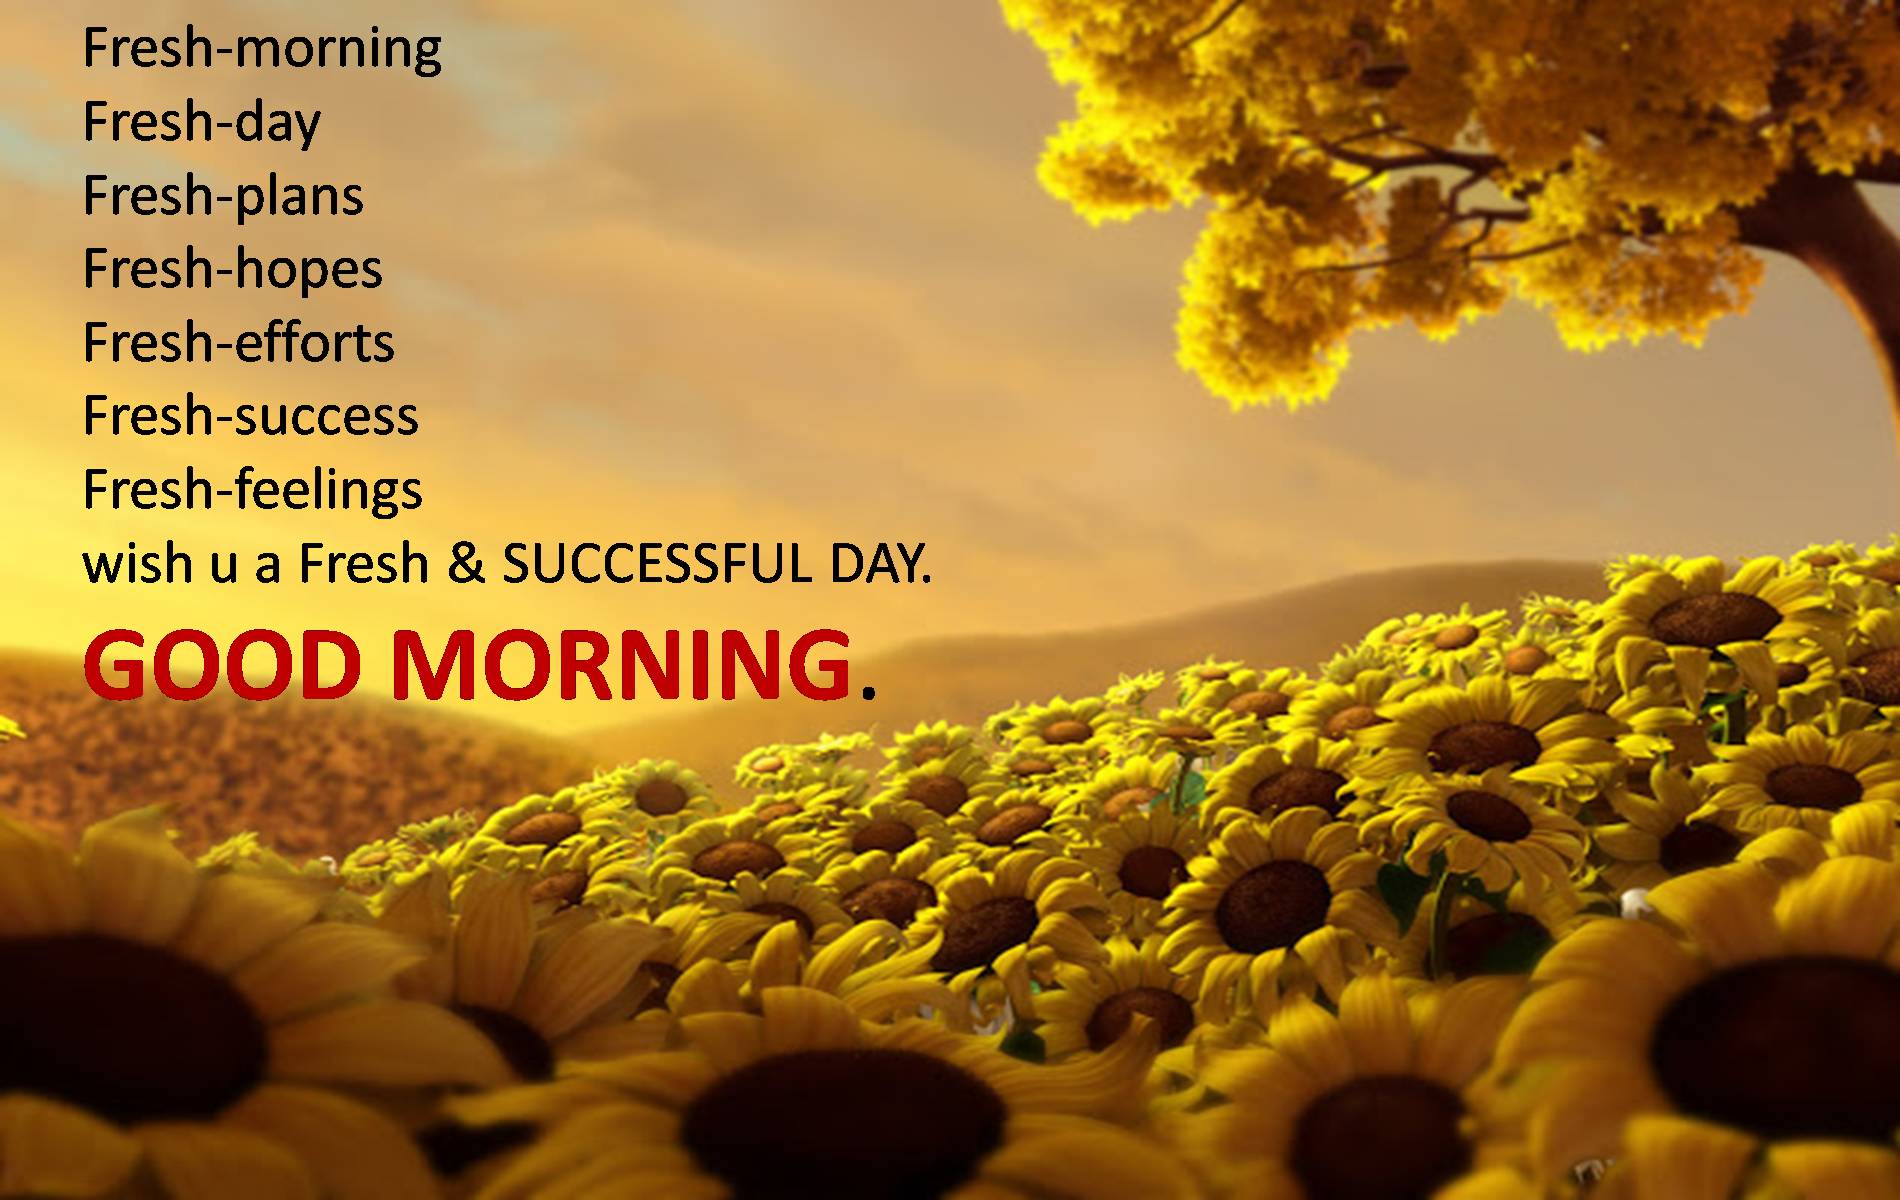 Download free images of good morning wishes